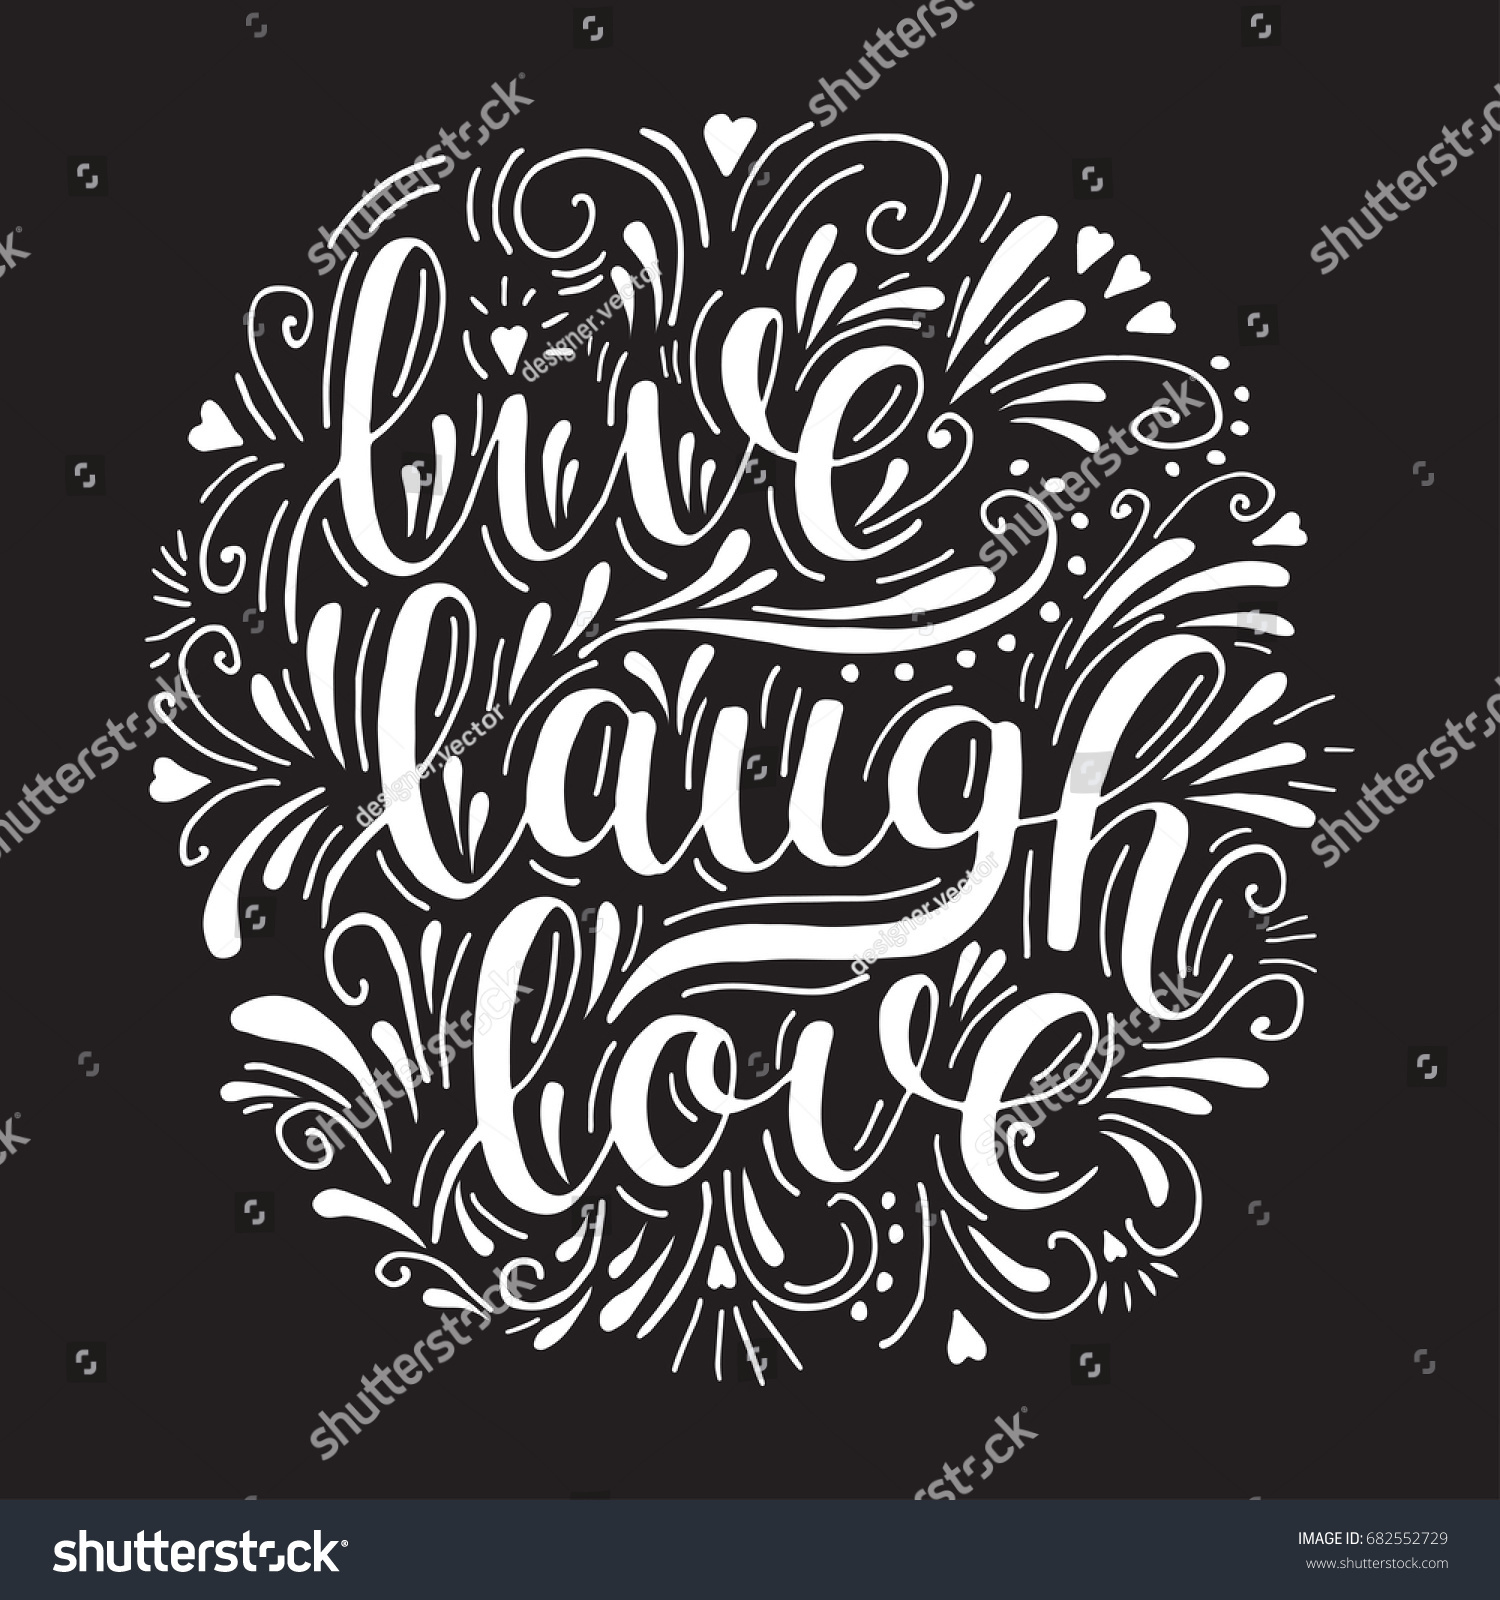 Live laugh love Vector inspirational hand drawn lettering on black background Motivation quote